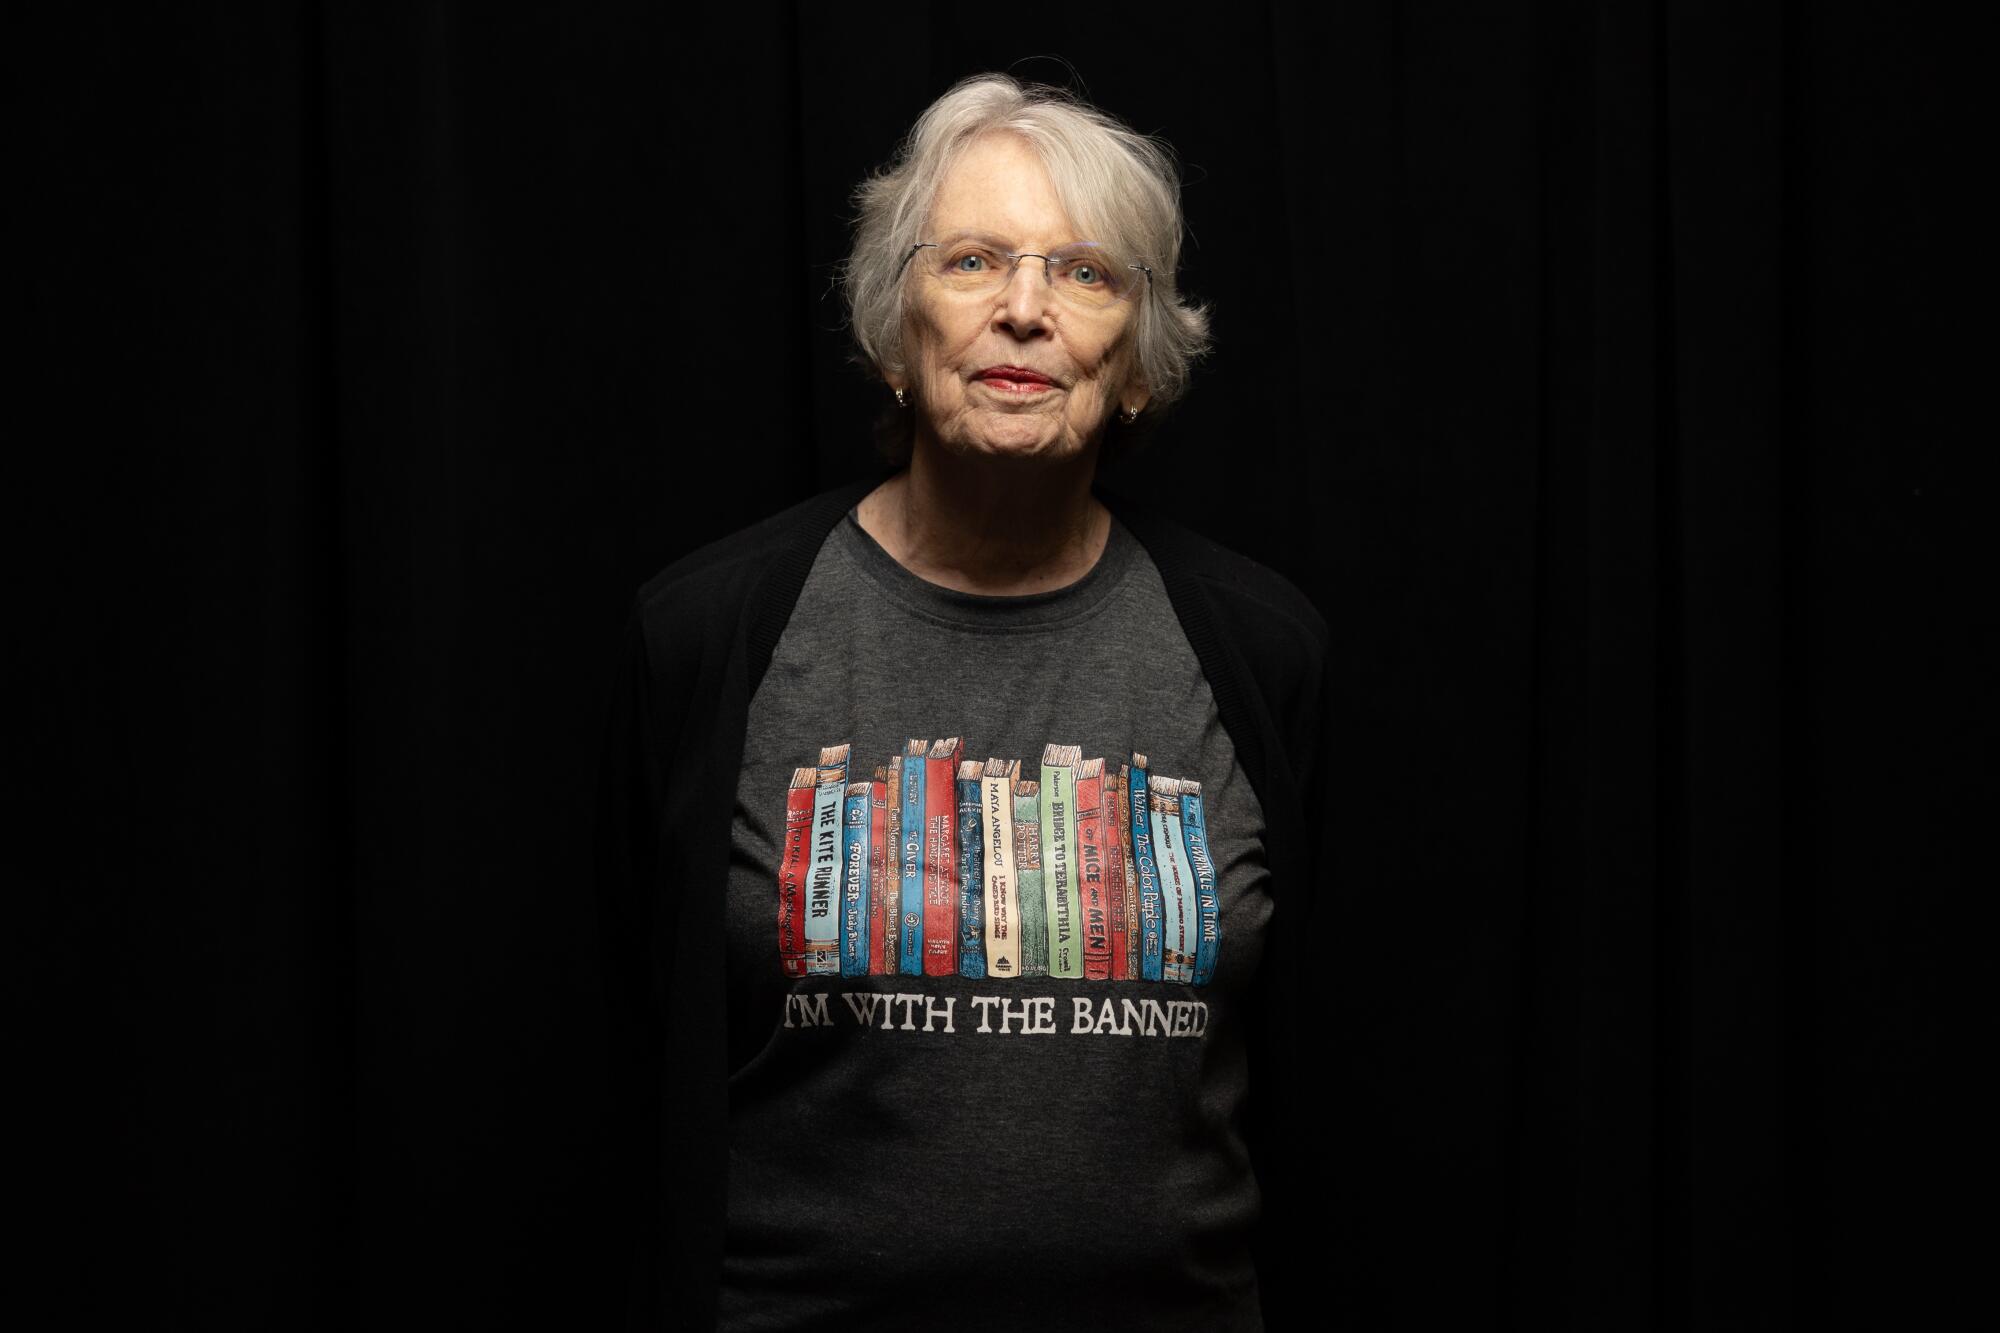 A woman appears against a black background wearing a T-shirt with books and the words "I'm with the banned."